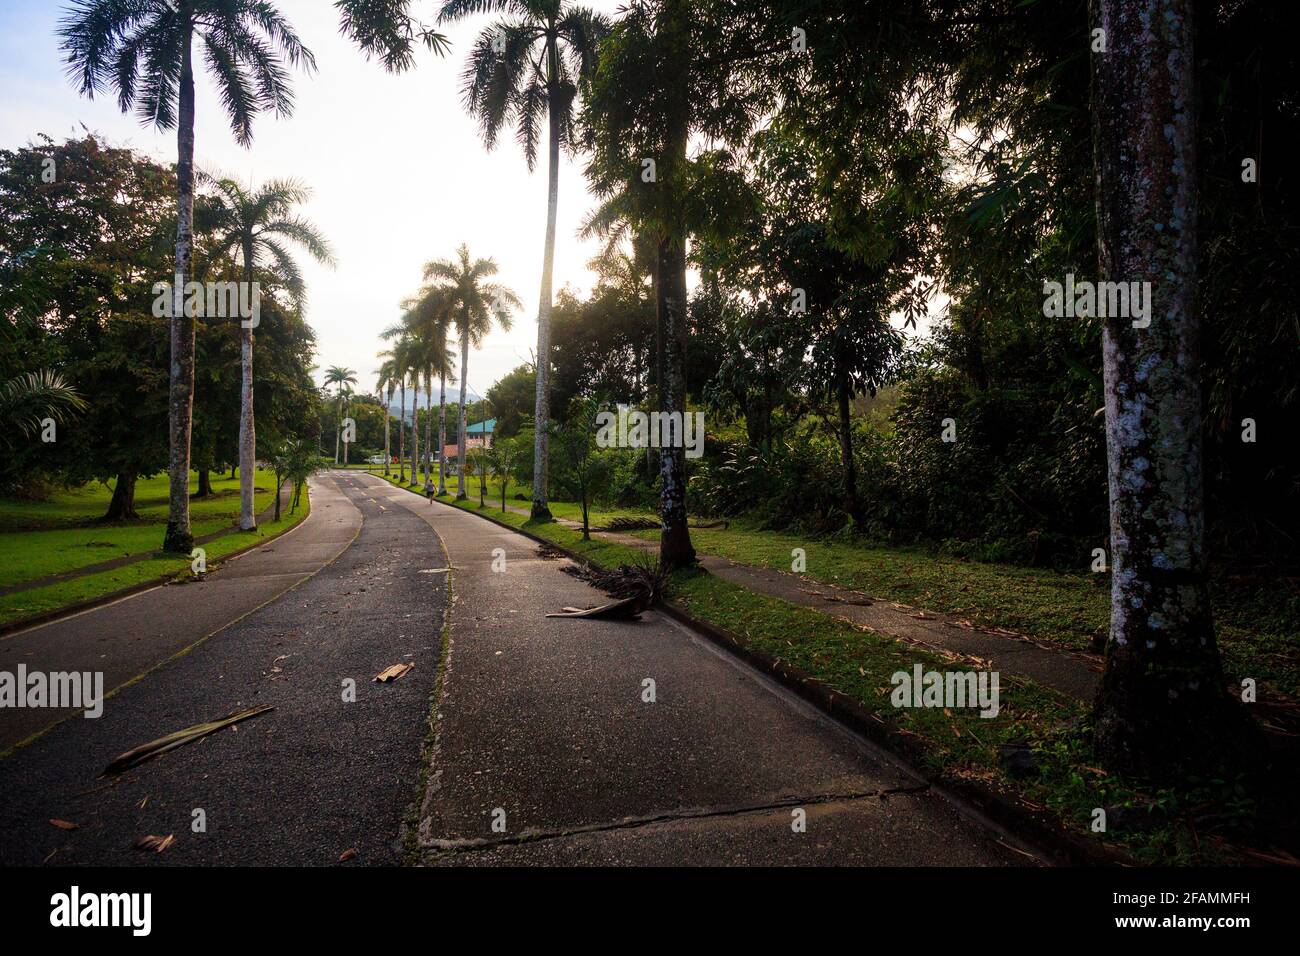 Street in the town of Gamboa, Colon province, Republic of Panama, Central America. Stock Photo